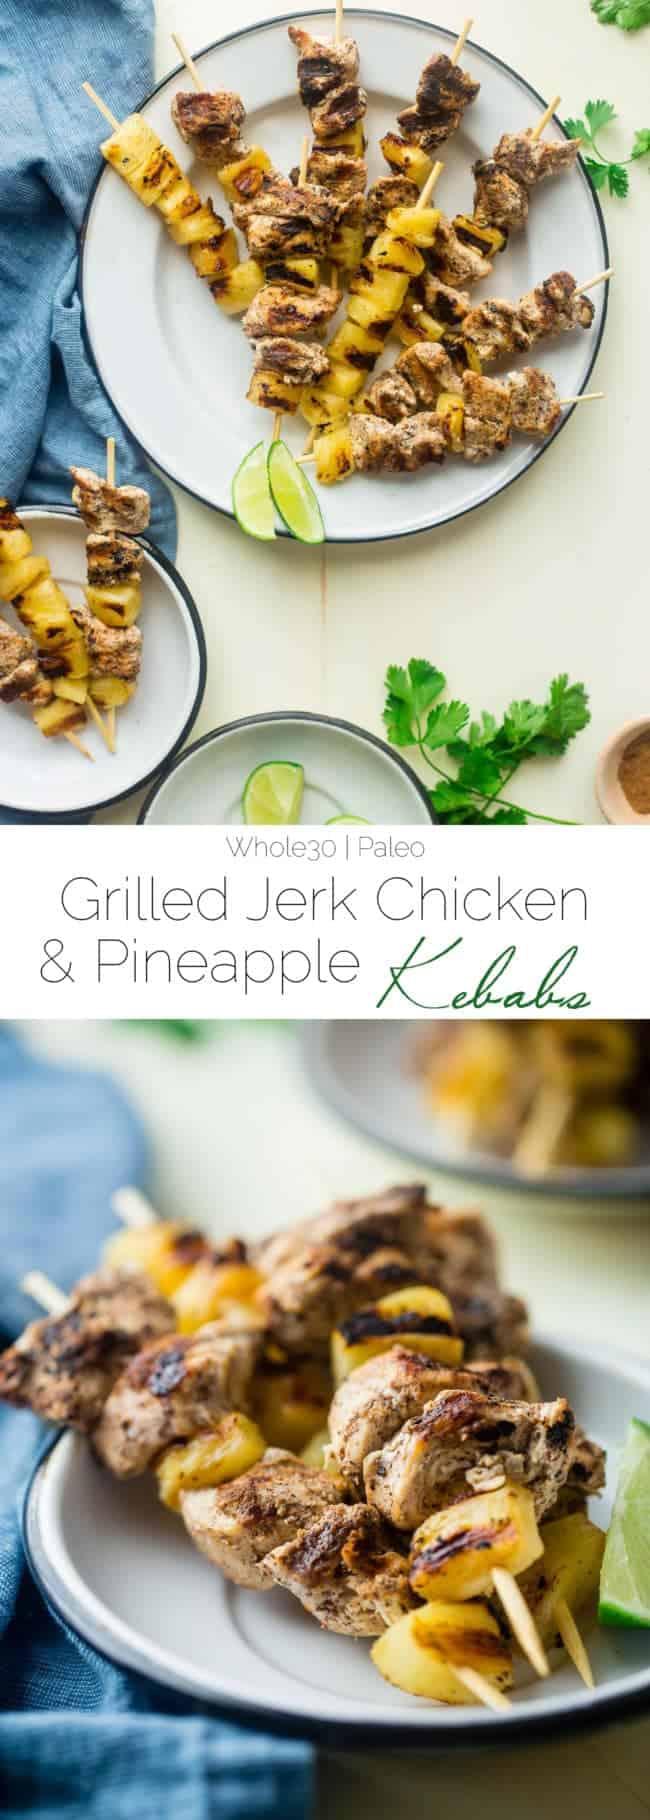 Whole30 Pineapple Jerk Chicken Kebabs - This easy jerk chicken recipe uses pineapple juice instead of sugar so it's Whole30 compliant and paleo friendly! It's a simple, flavorful weeknight meal that's perfect for the summer! | Foodfaithfitness.com | @FoodFaithFit